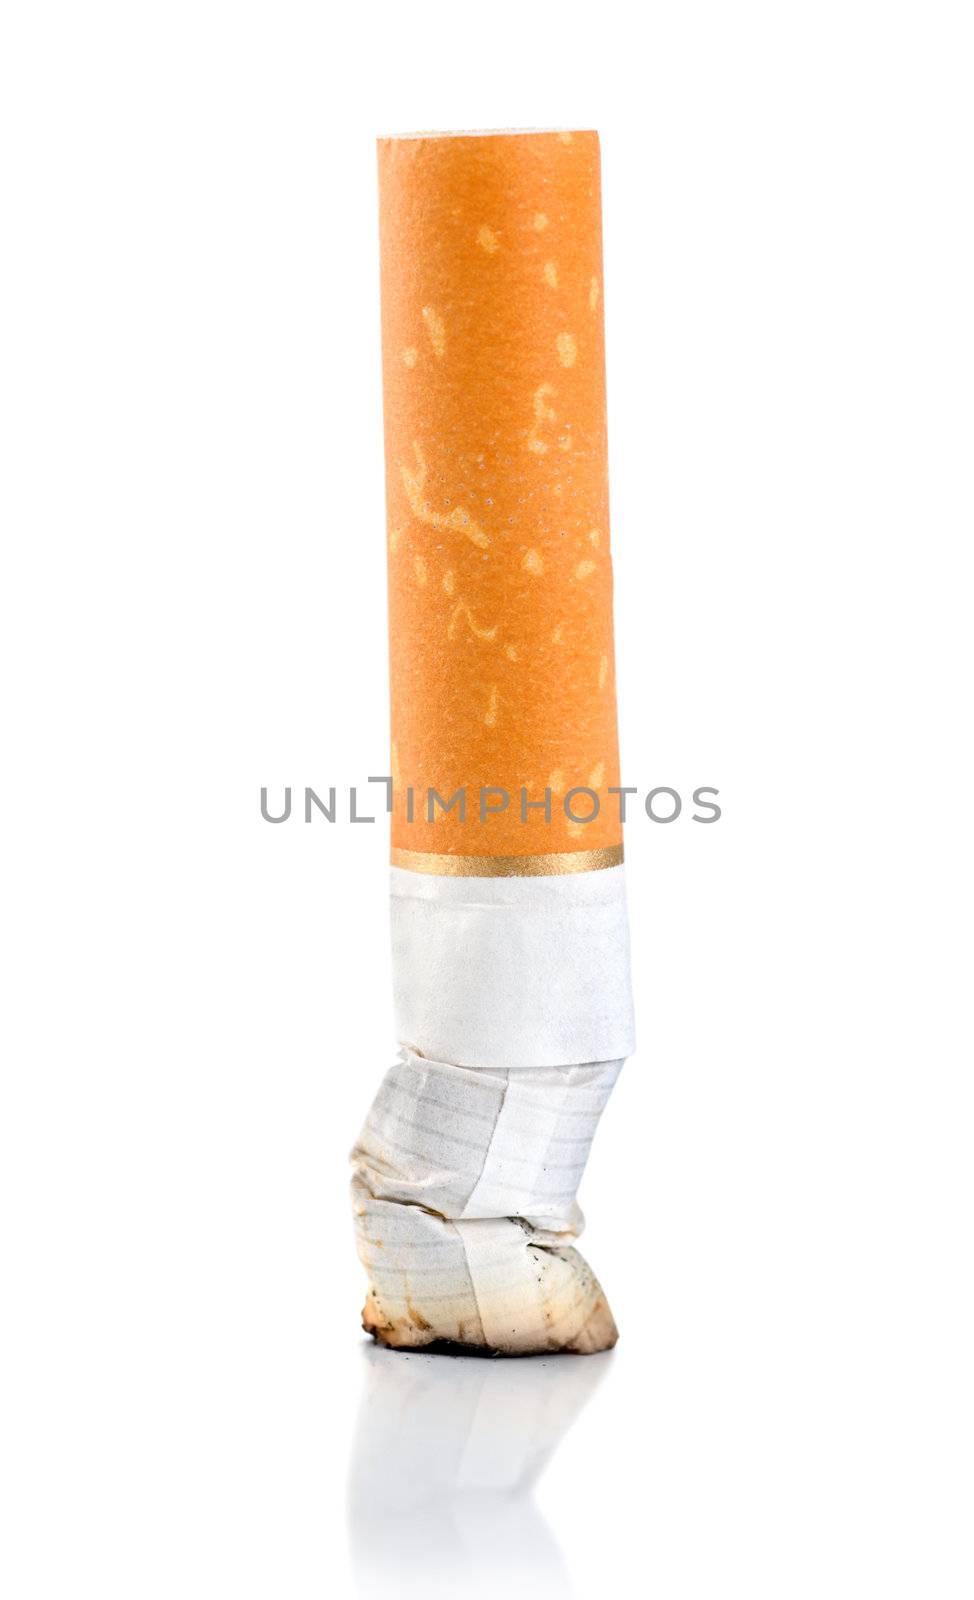 Cigarette butt (Clipping Path) by Givaga